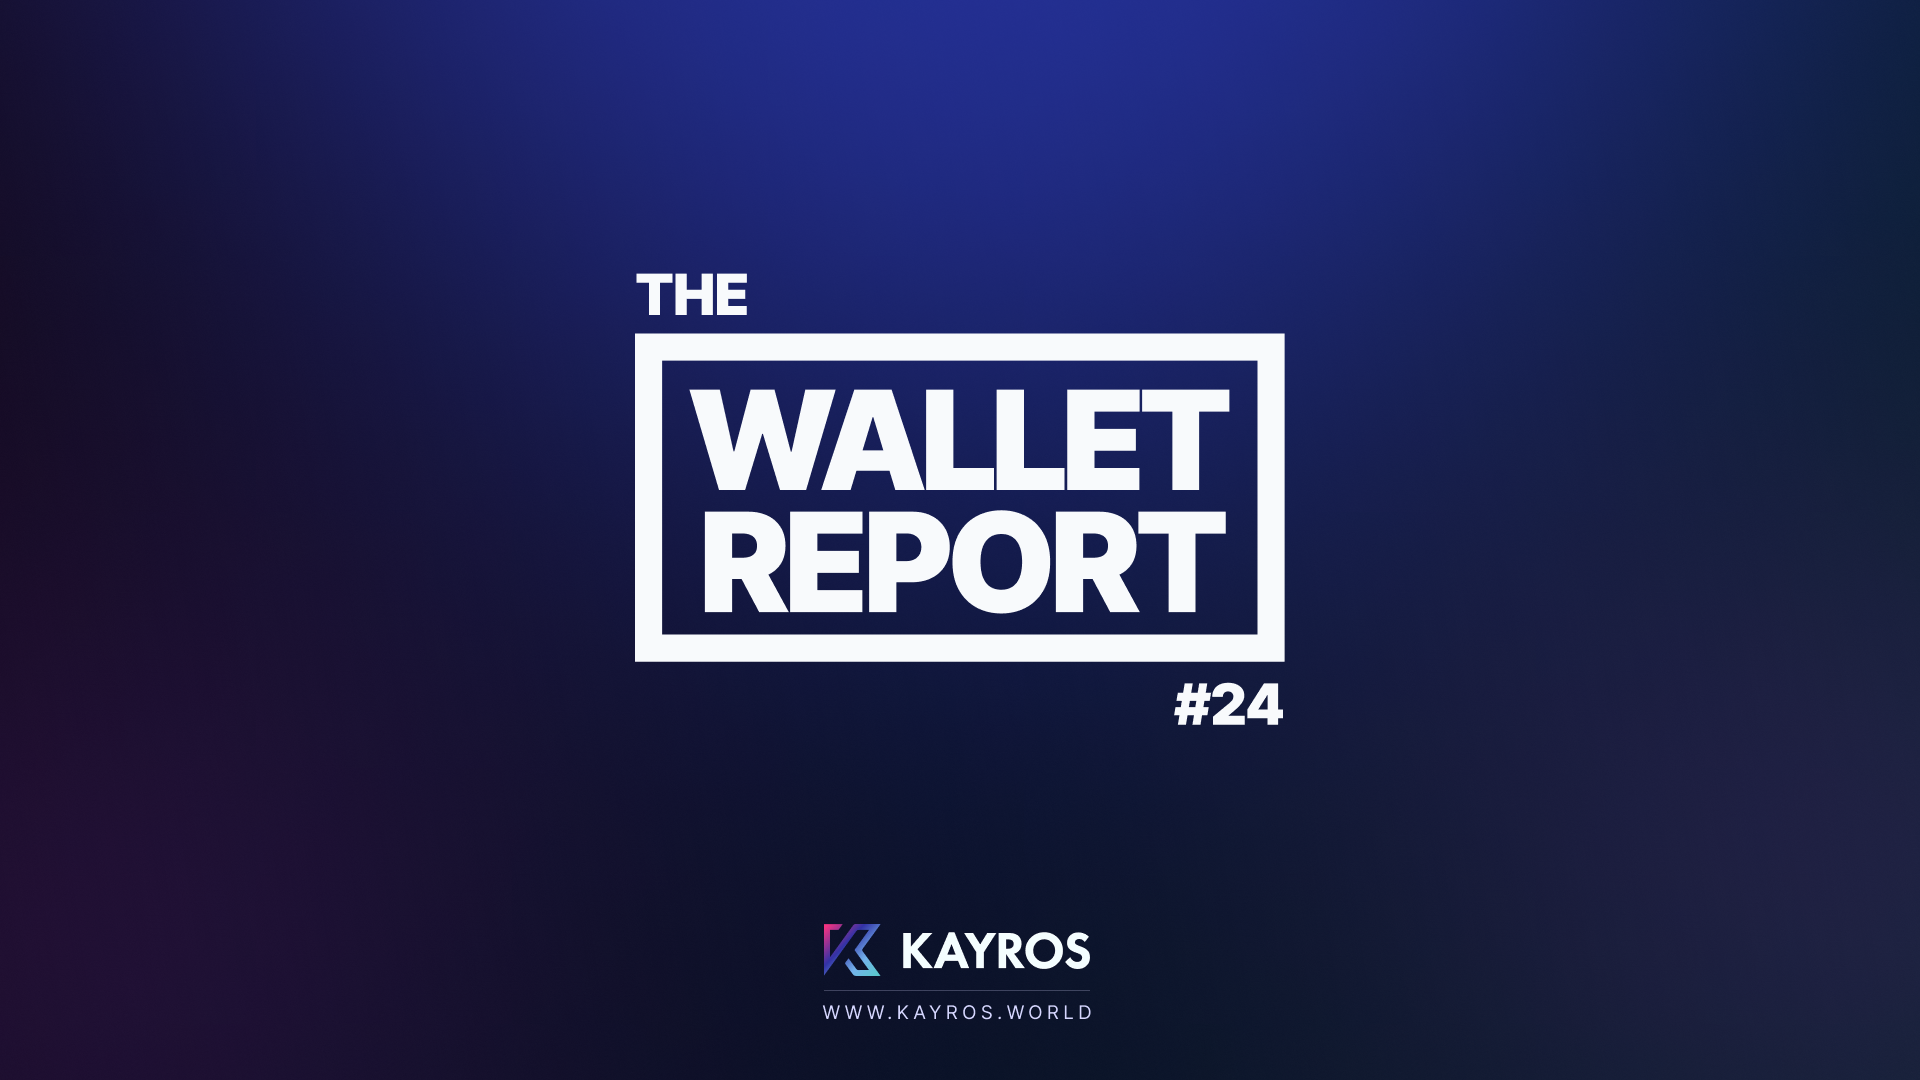 The Wallet Report #24